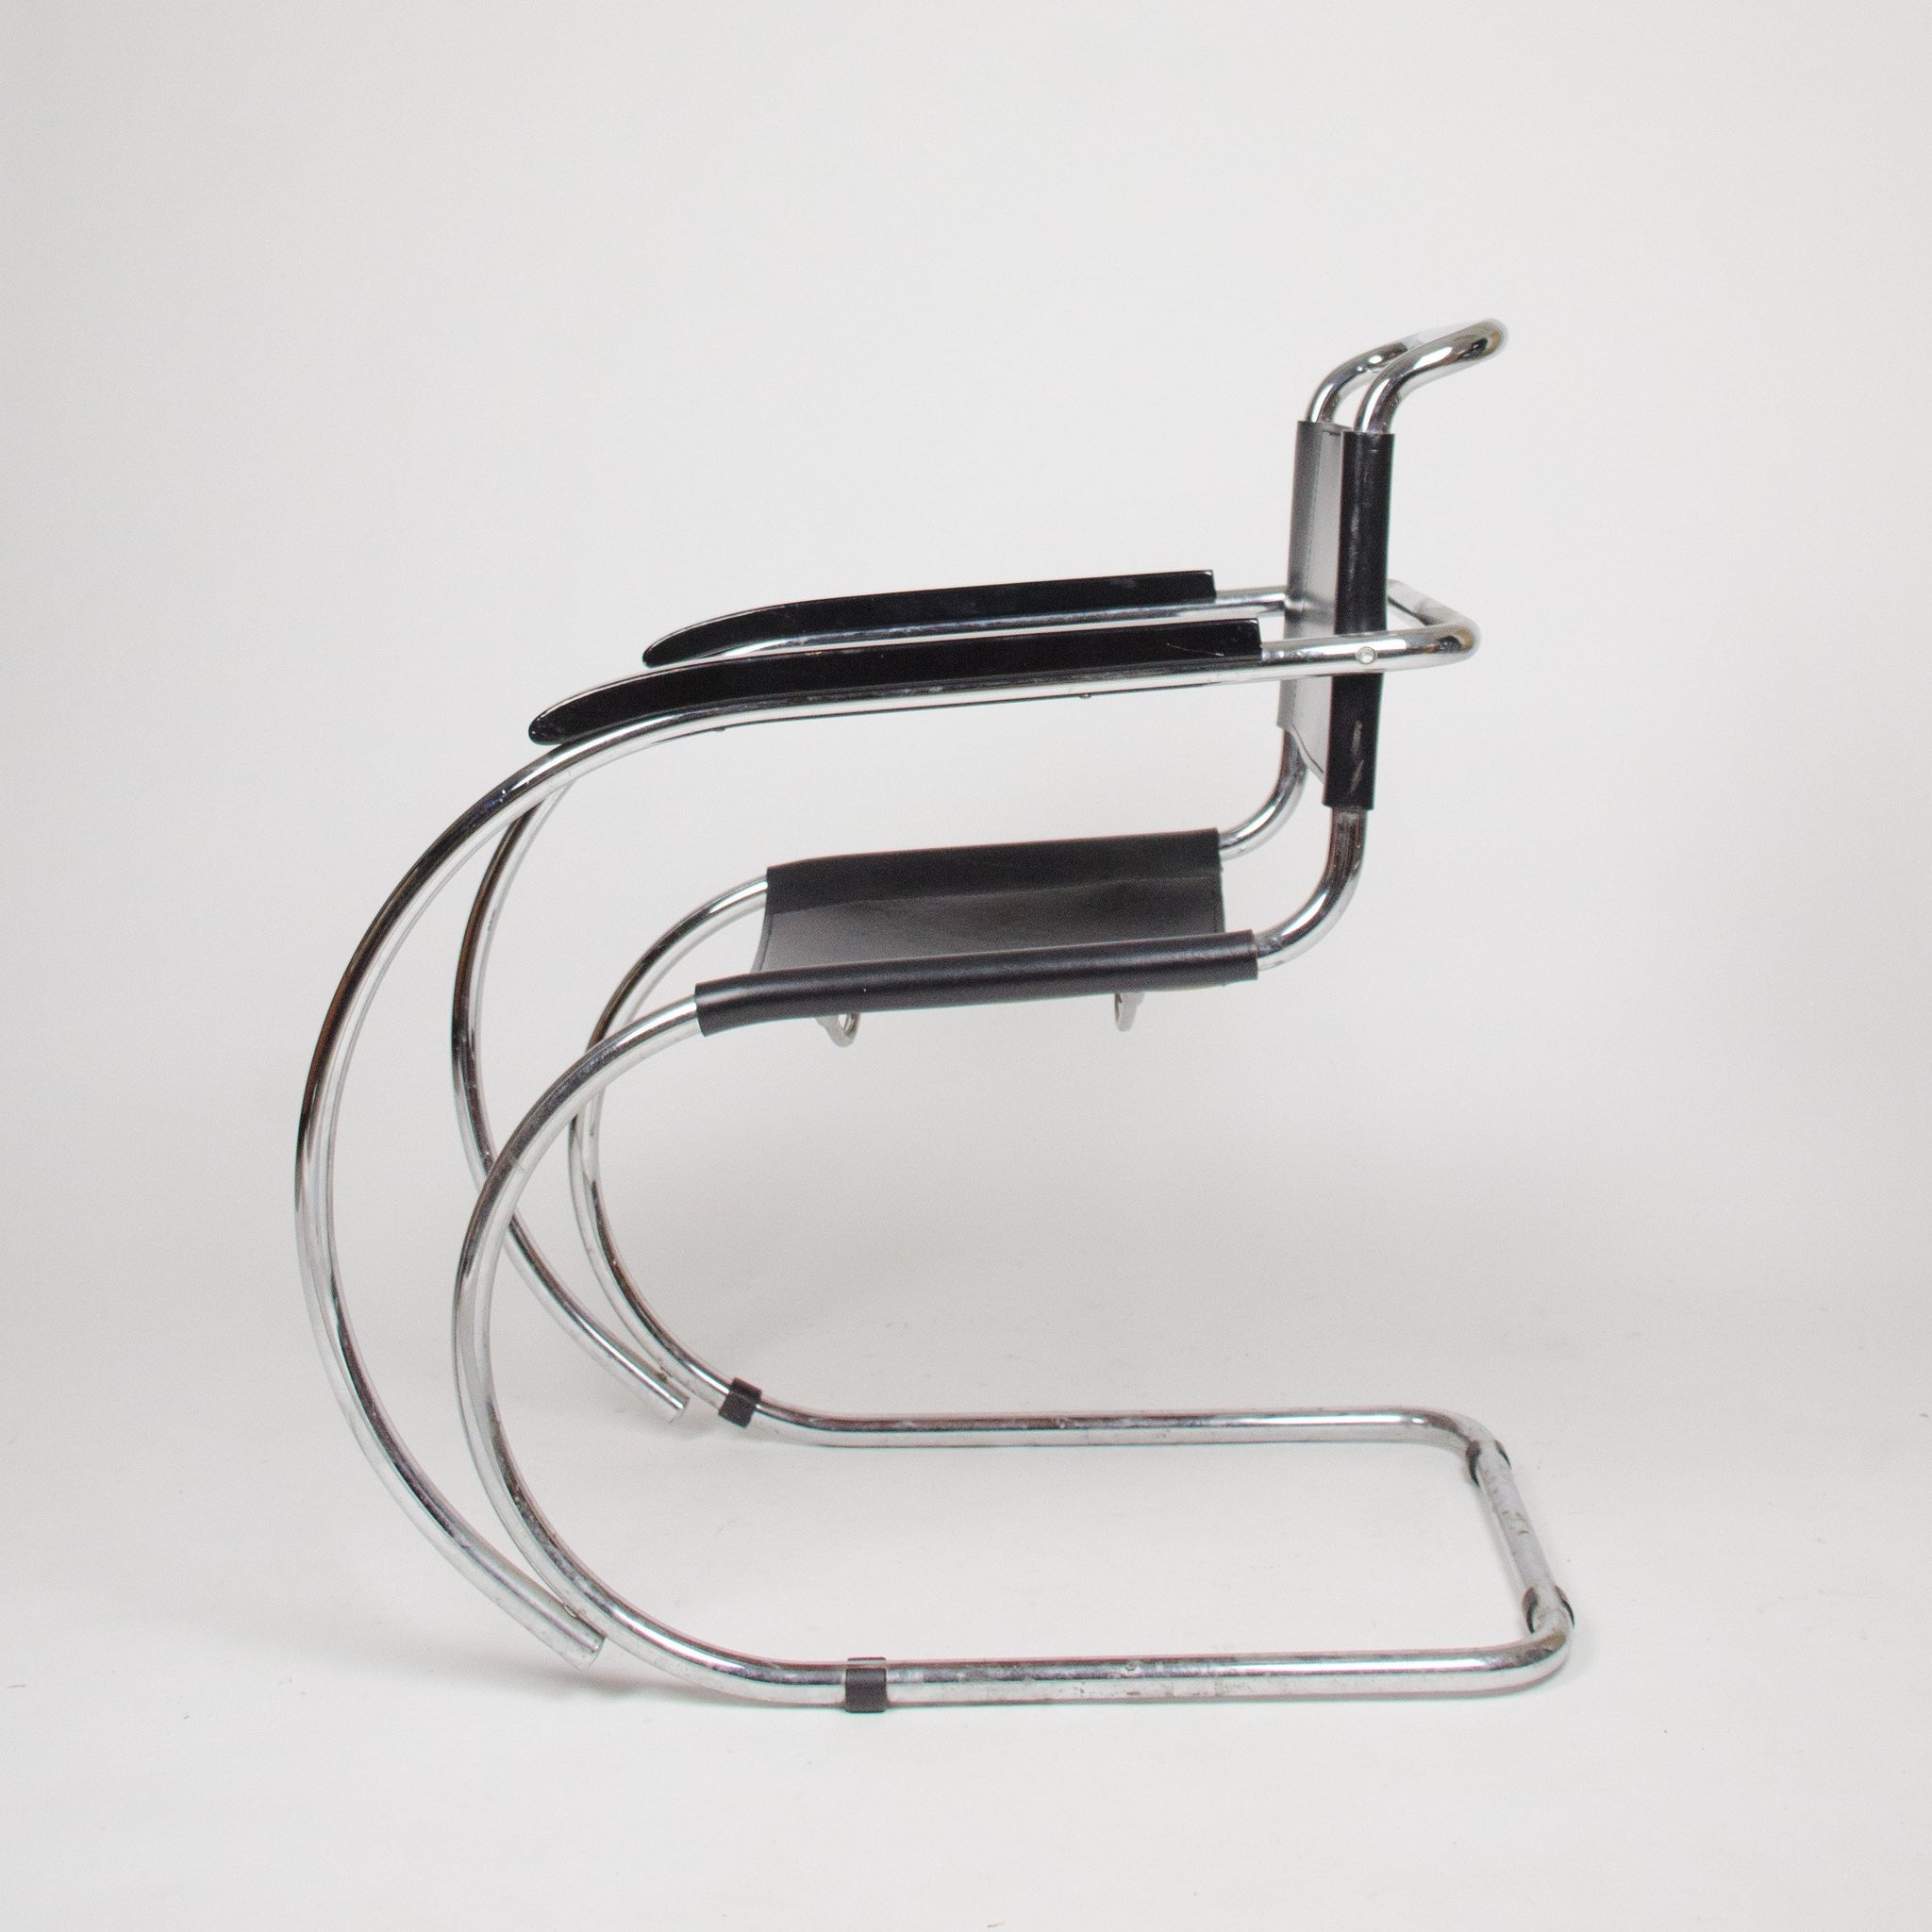 MR20 Cantilever Chairs